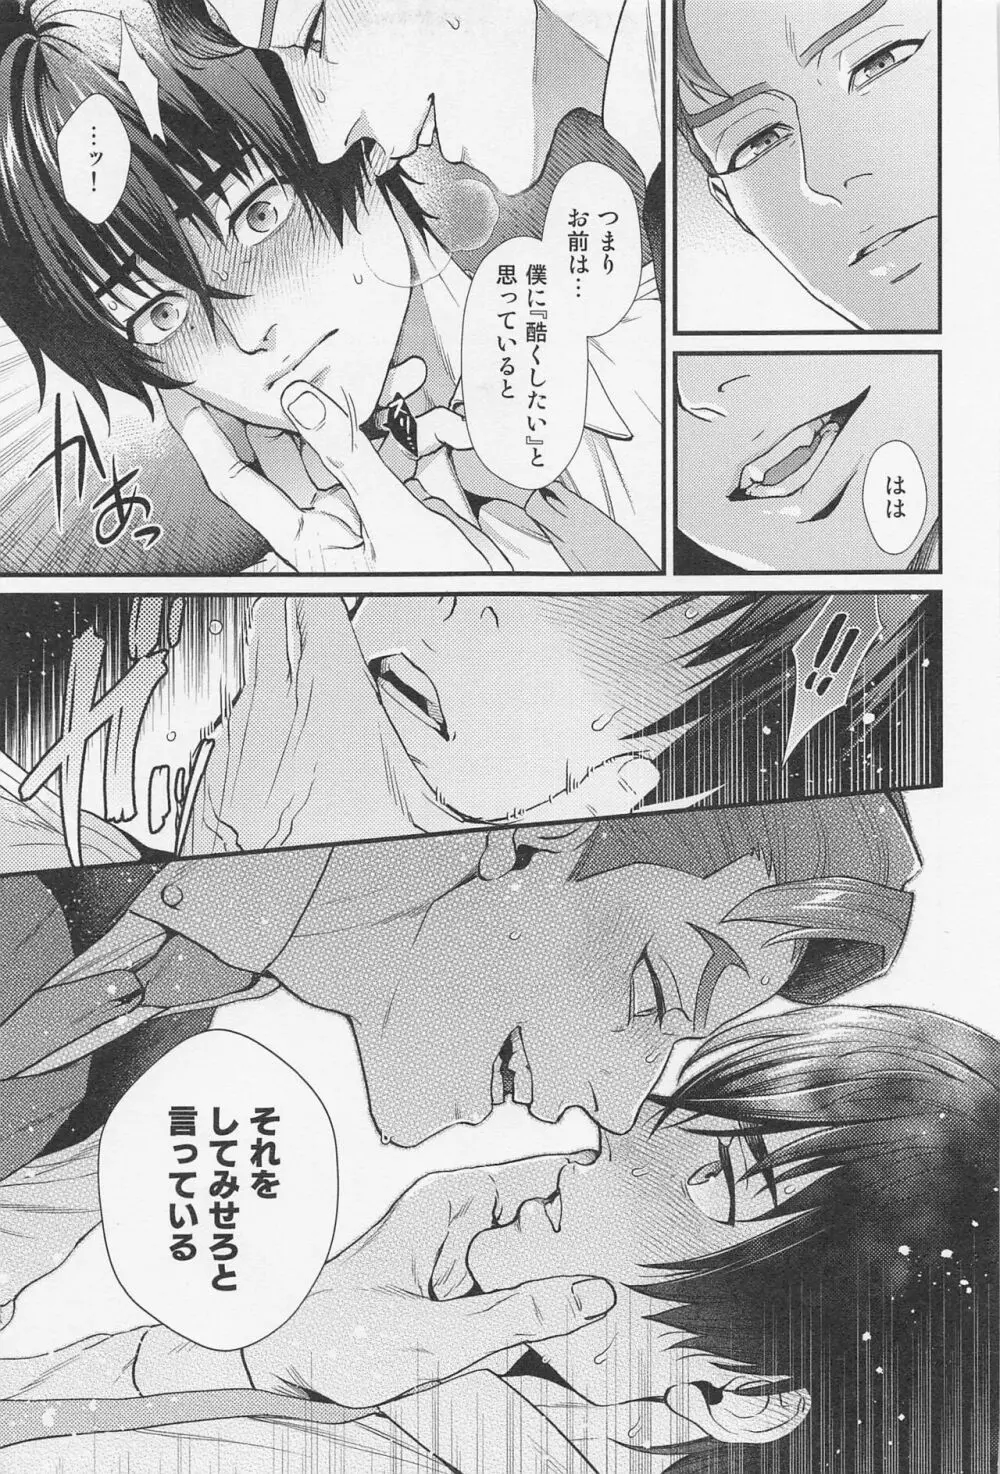 LOVE FIXED POINT - 愛の定点観測 Page.14